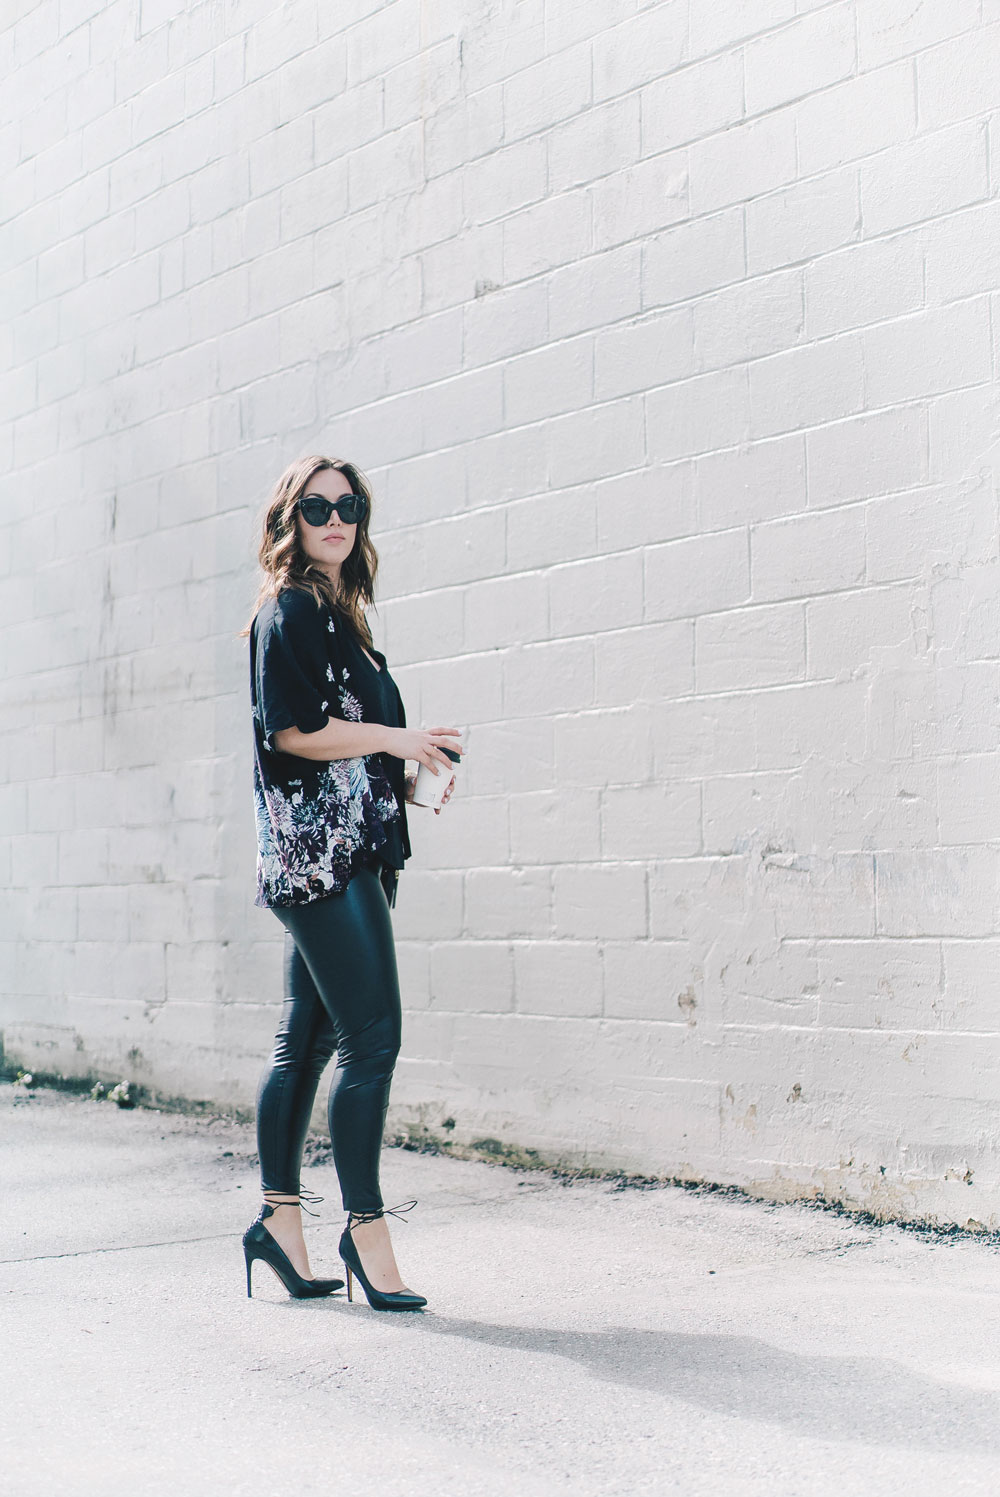 Spring floral trend styling tips in Aritzia Kimono, Celine Sunglasses, Aritzia Leather Leggings, how to wear spring florals, Aritzia spring tops, how to wear a kimono, Leah Alexandra jewelry by To Vogue or Bust 